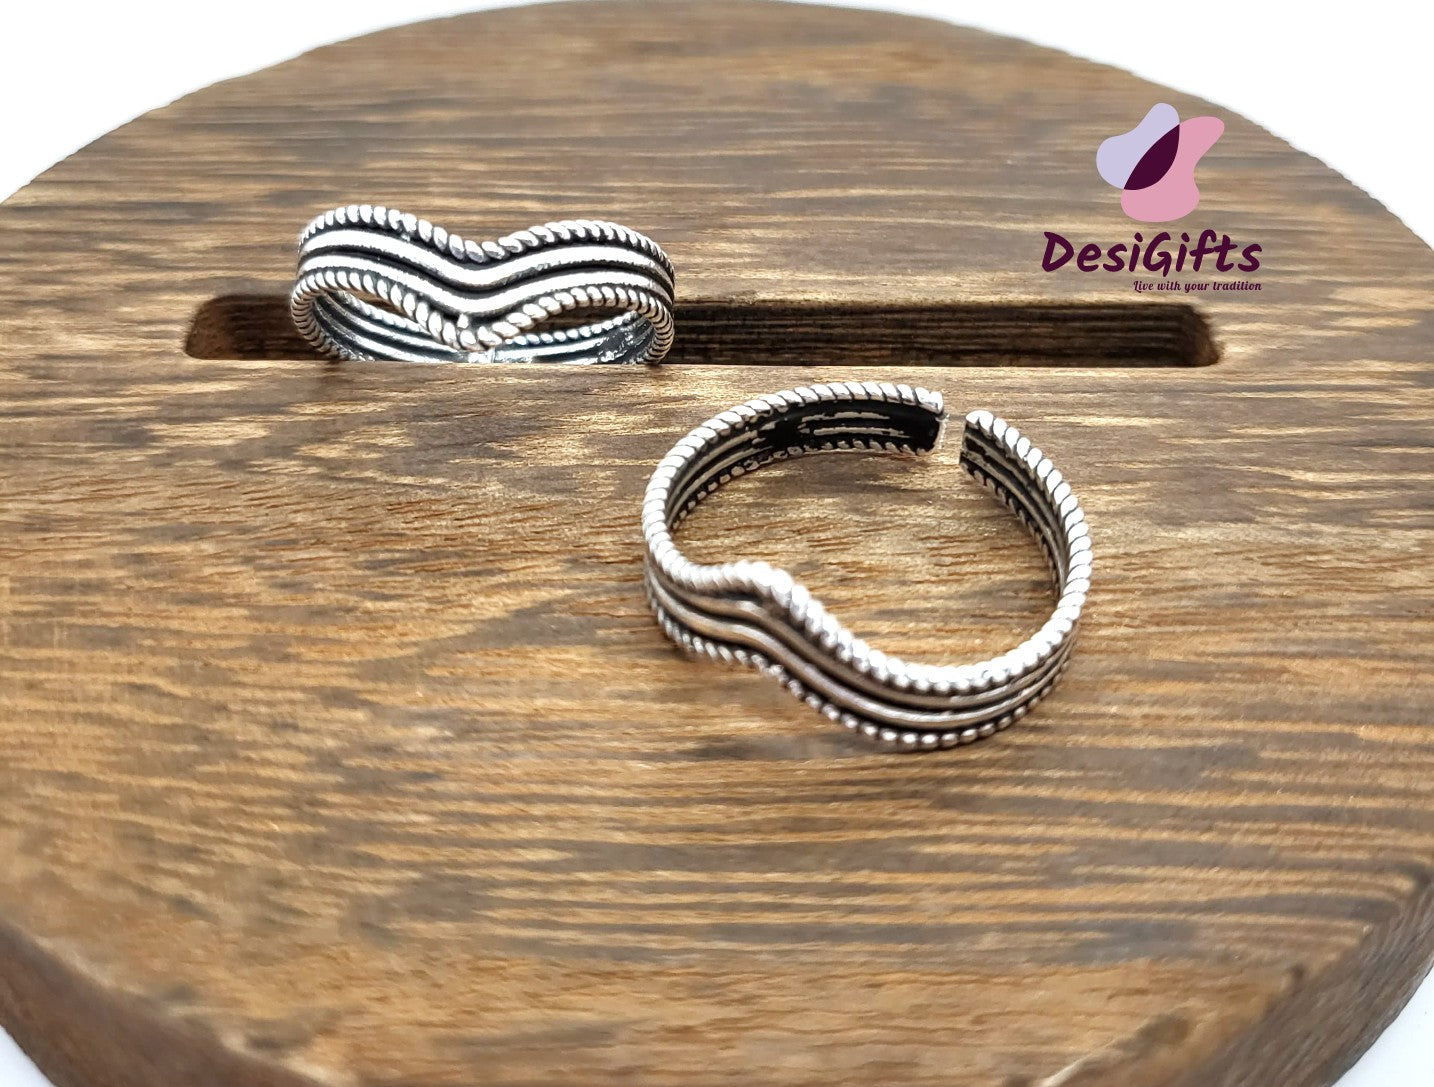 Pair of good looking Oxidized Silver Toe Rings Stylish and Latest